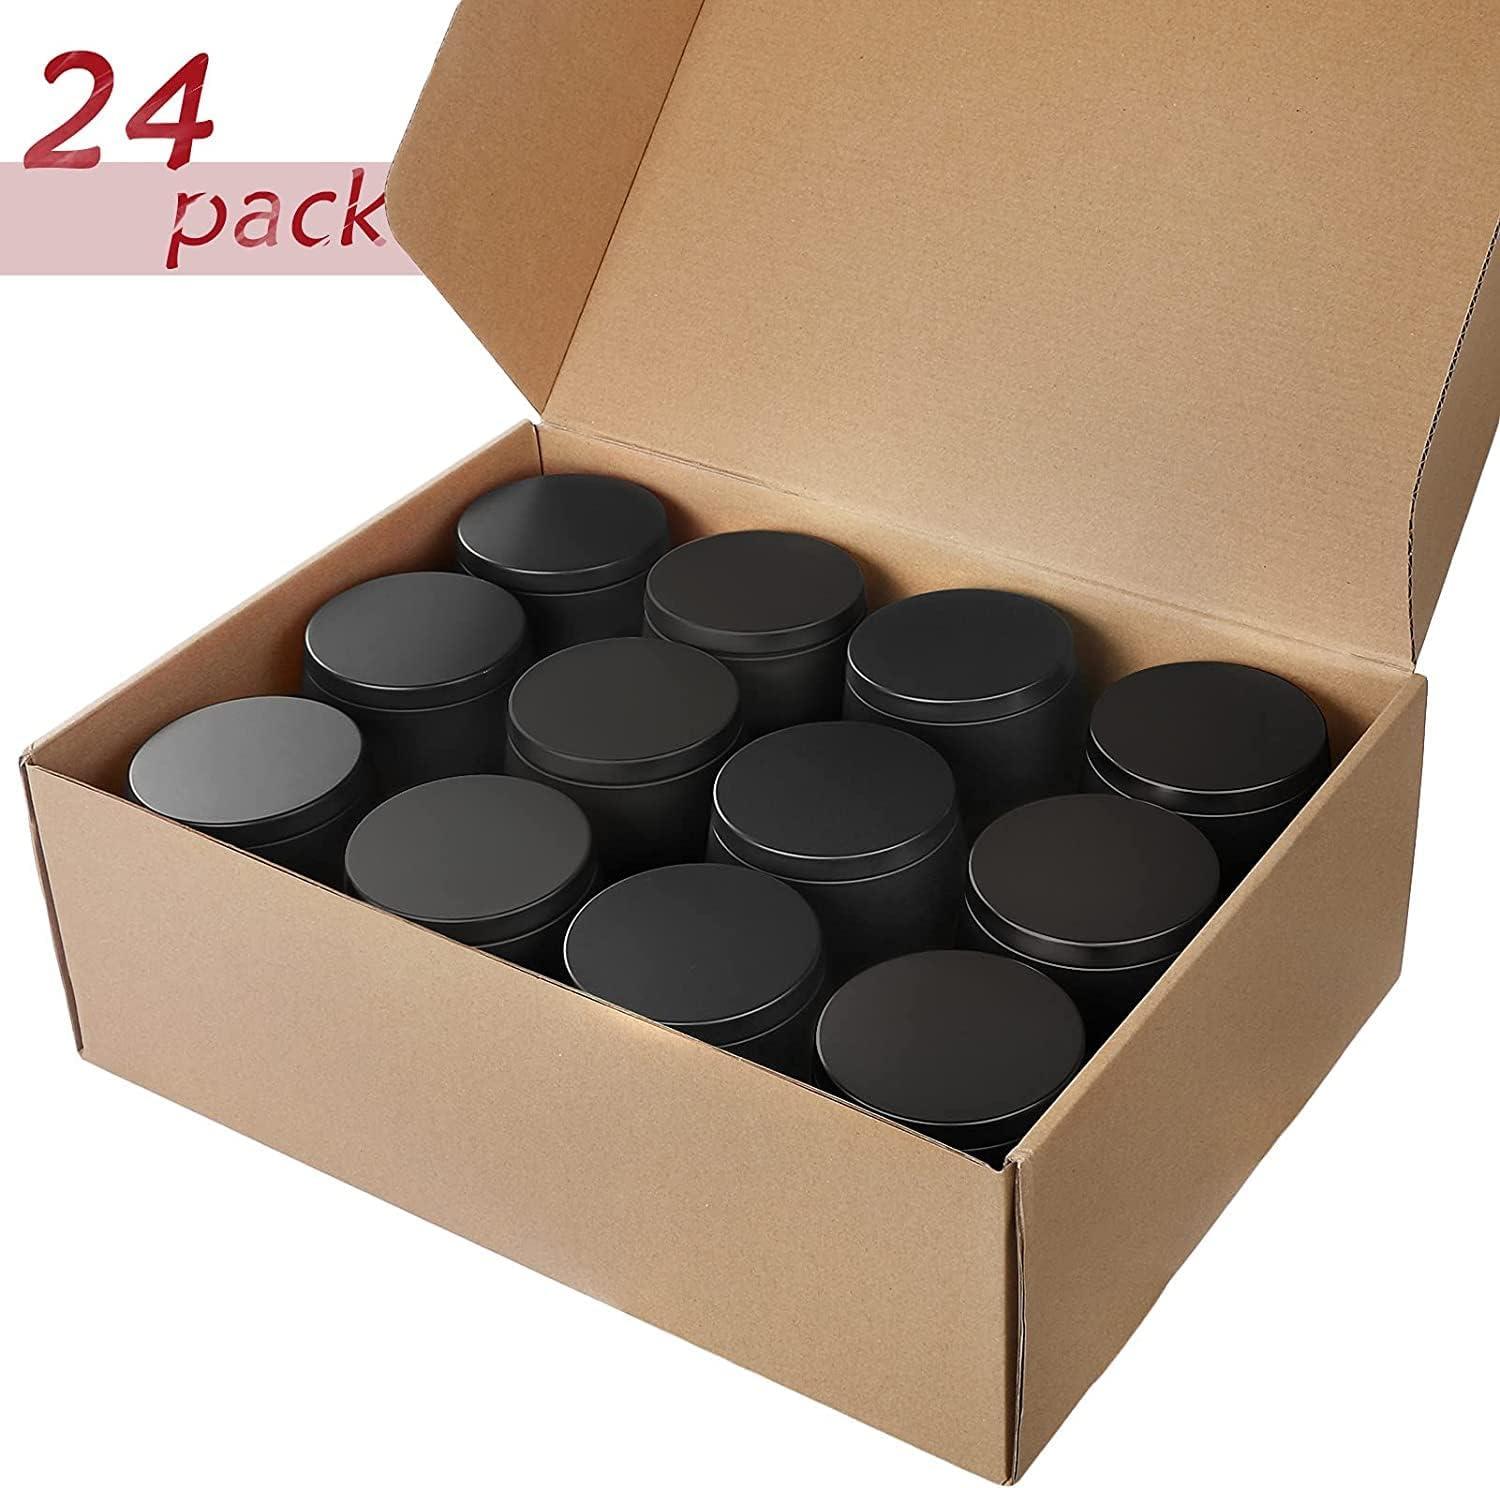 Pavelle Black Candle Container Tins, 24 Metal Tin Containers with Lids for  DIY Candle Making